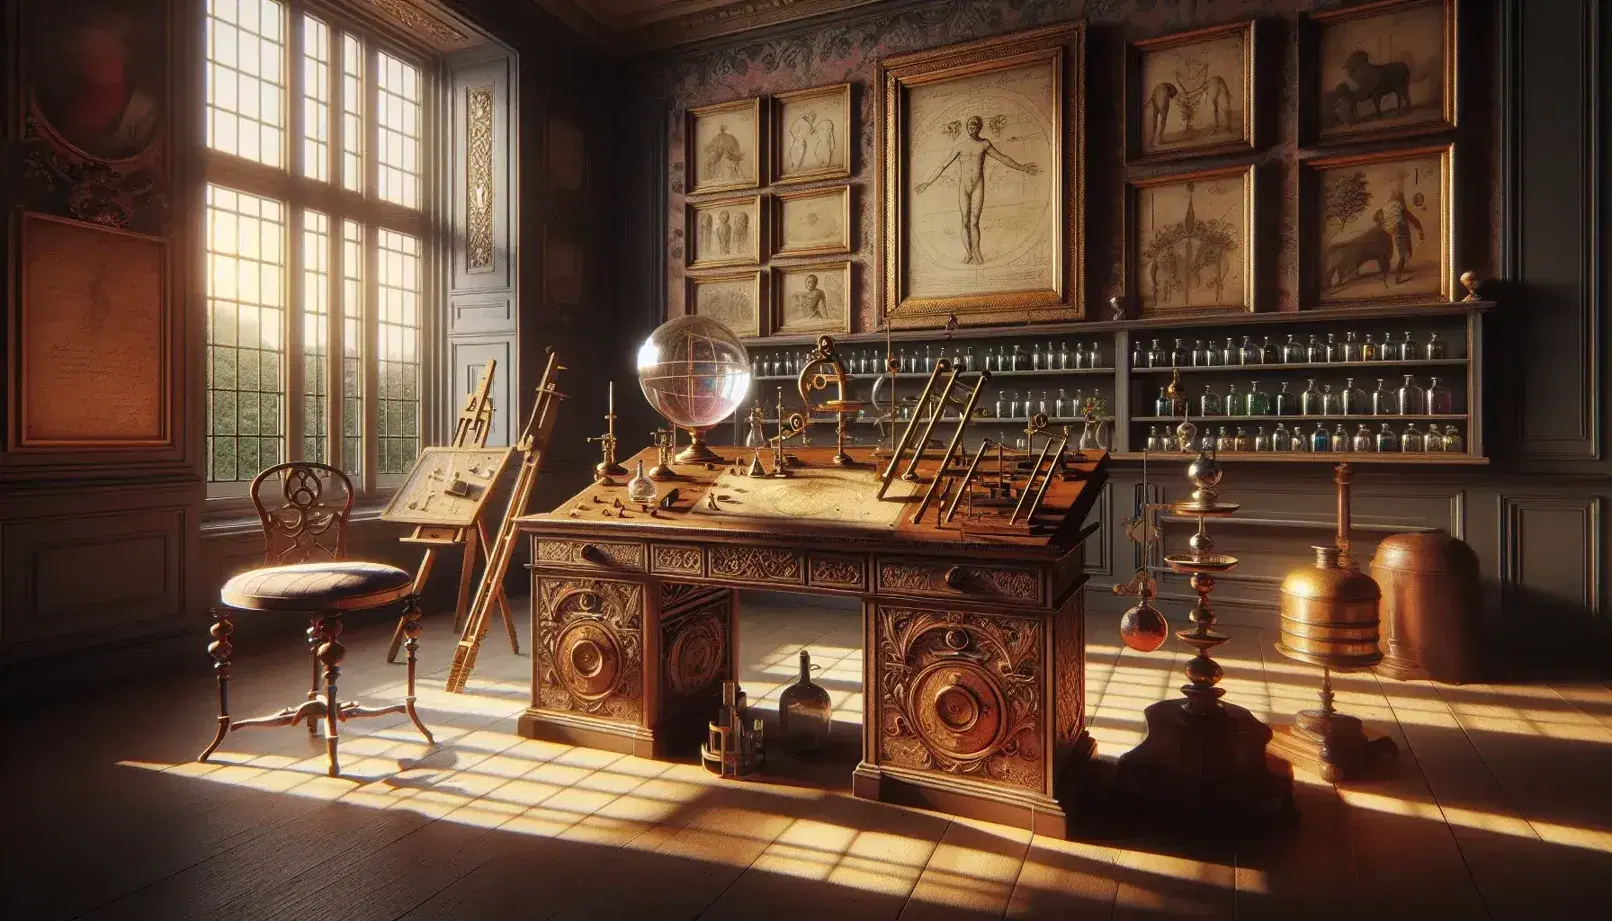 Eighteenth-century study with wooden desk, Enlightenment scientific instruments, colored glass bottles, anatomical and botanical illustrations.